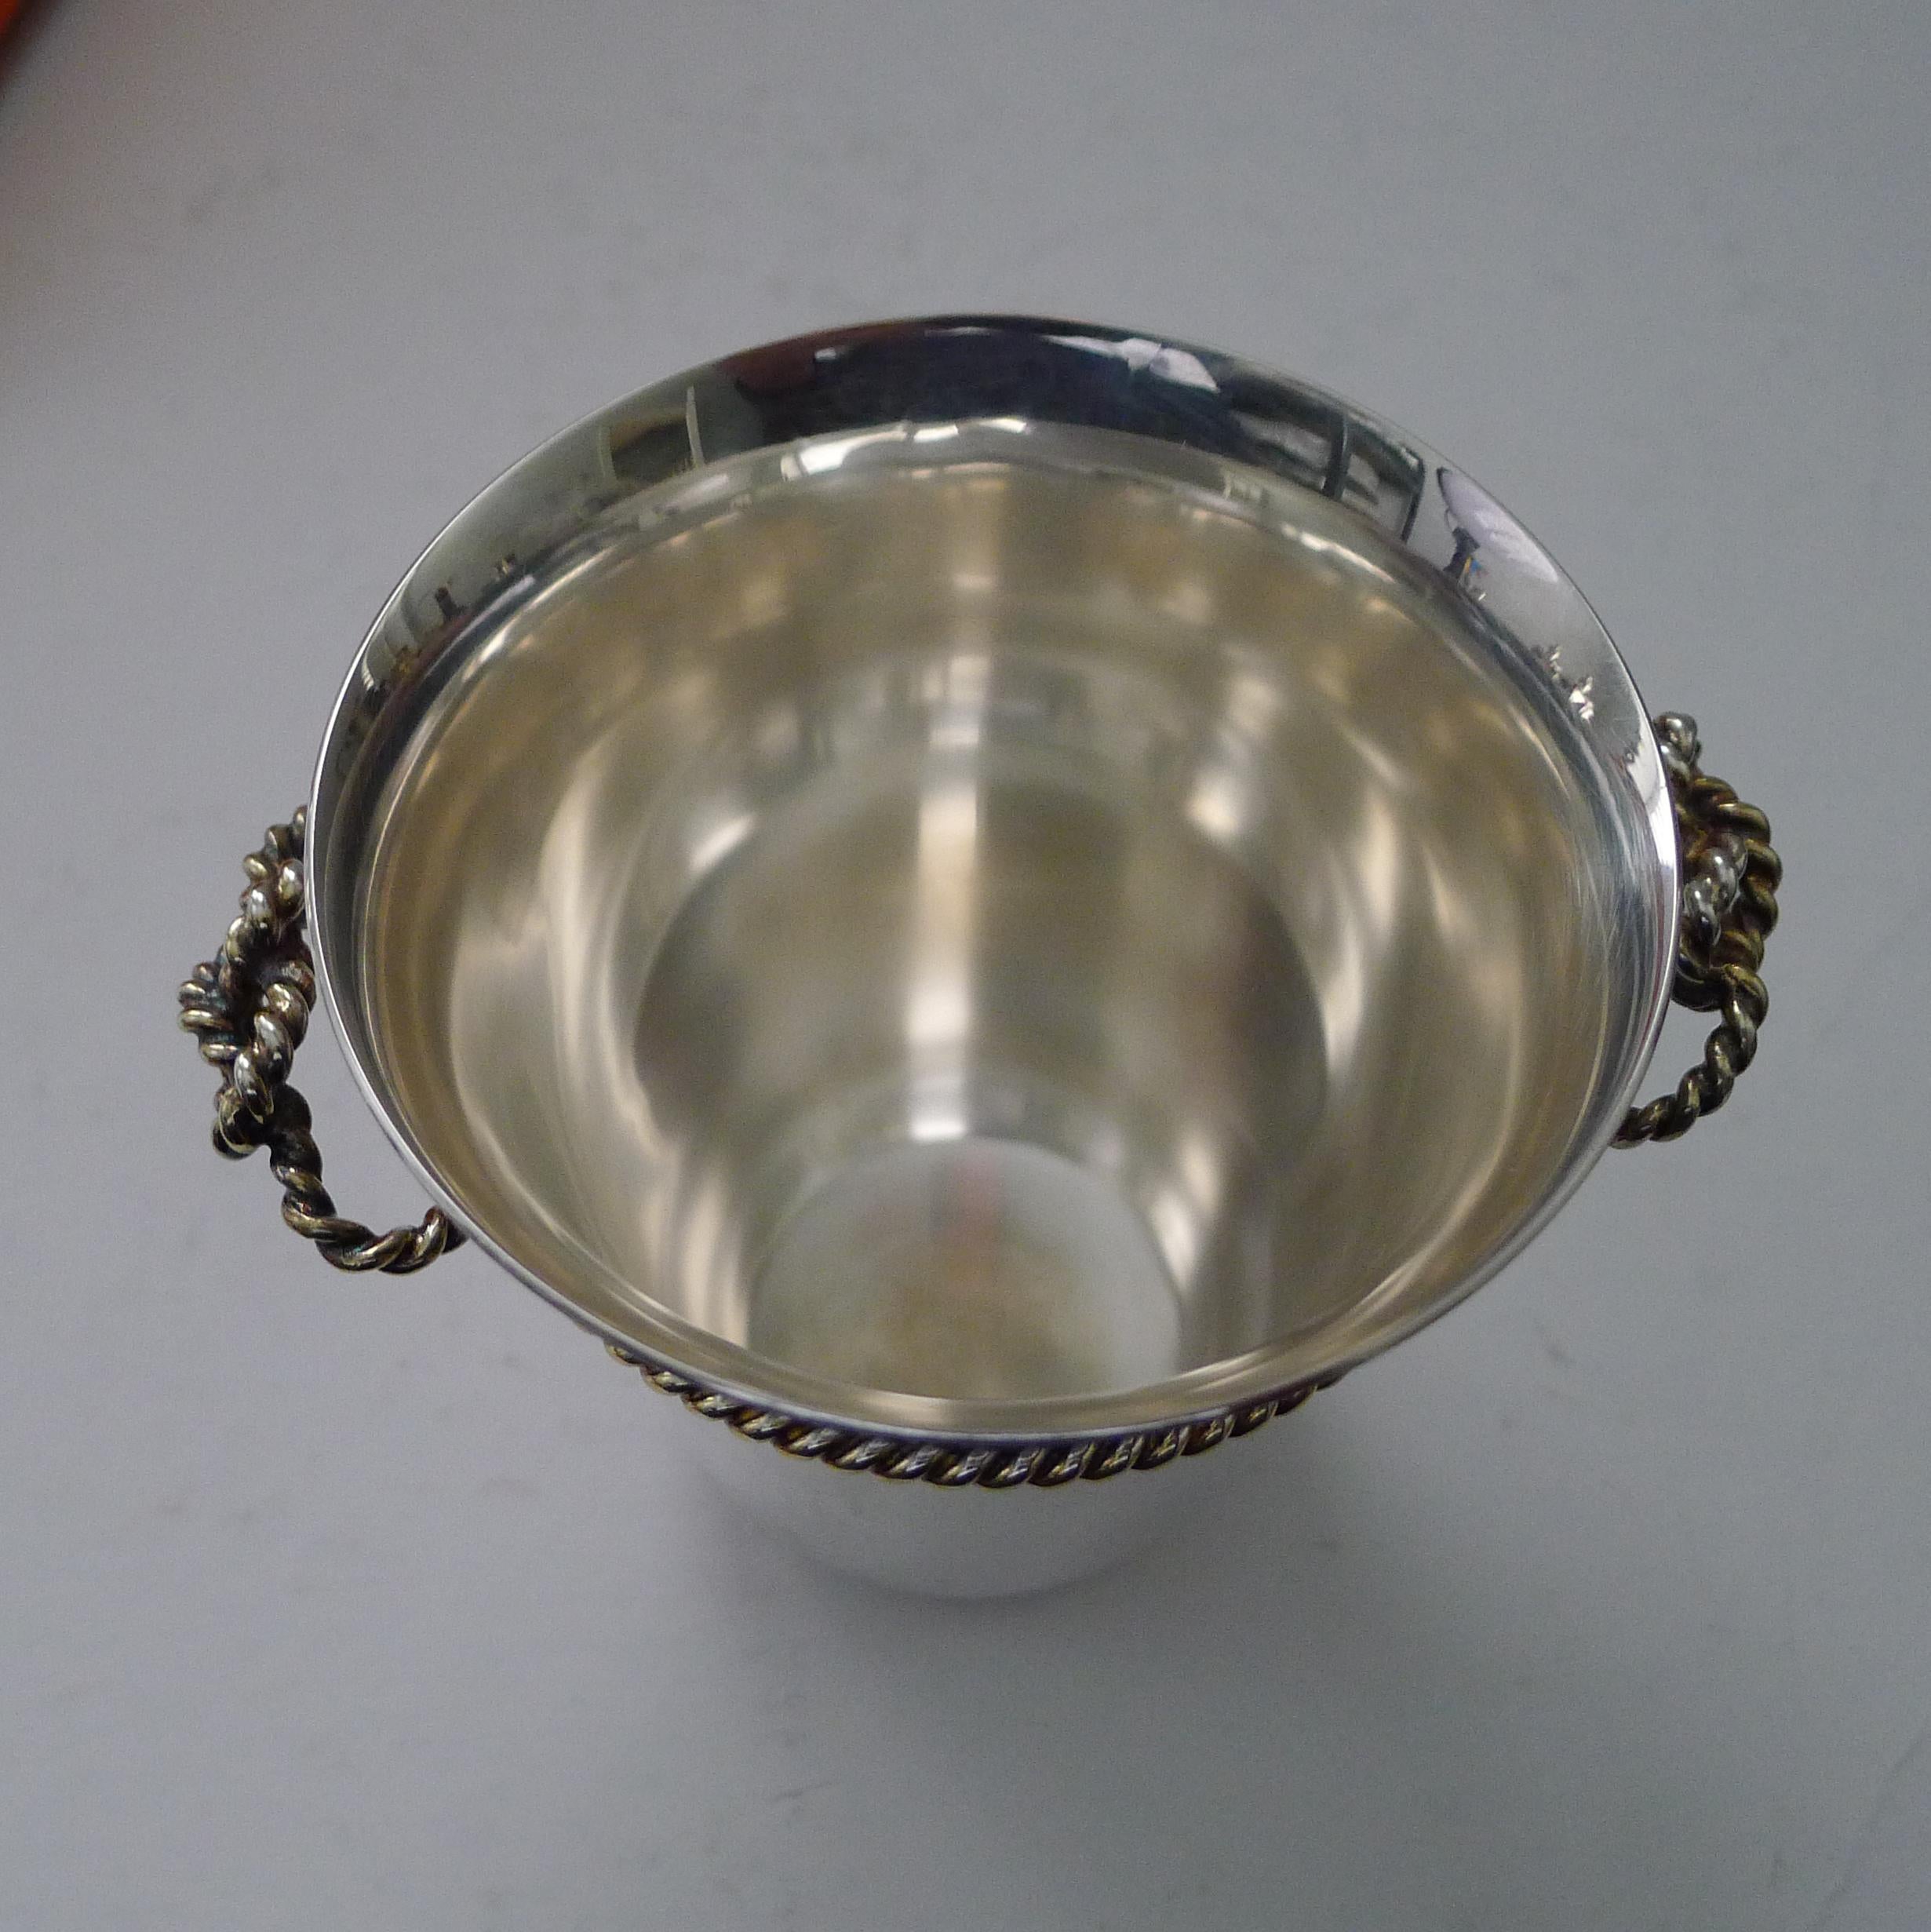 Hermes, Paris - Silver & Gold Plated Vase / Beaker / Desk Cup In Good Condition For Sale In Bath, GB